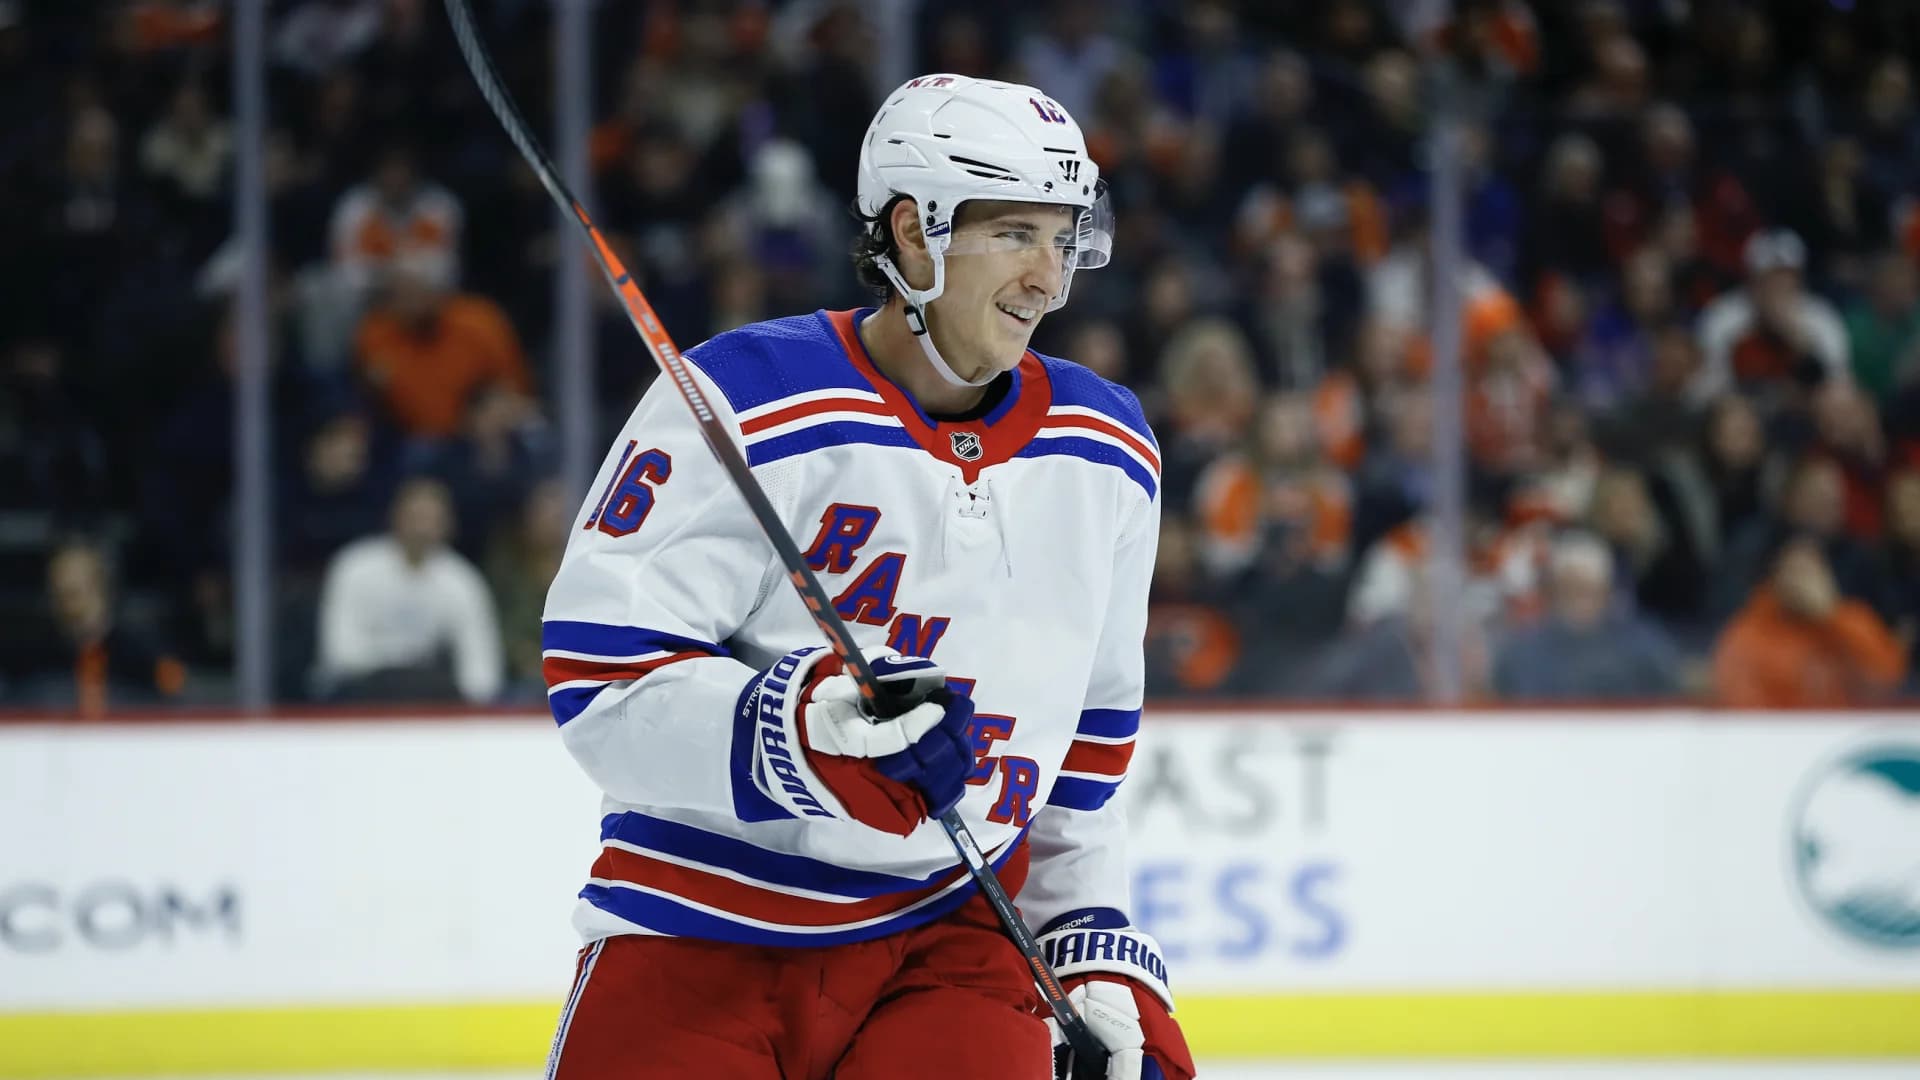 Rangers agree to terms with Ryan Strome on $9M, 2-year deal